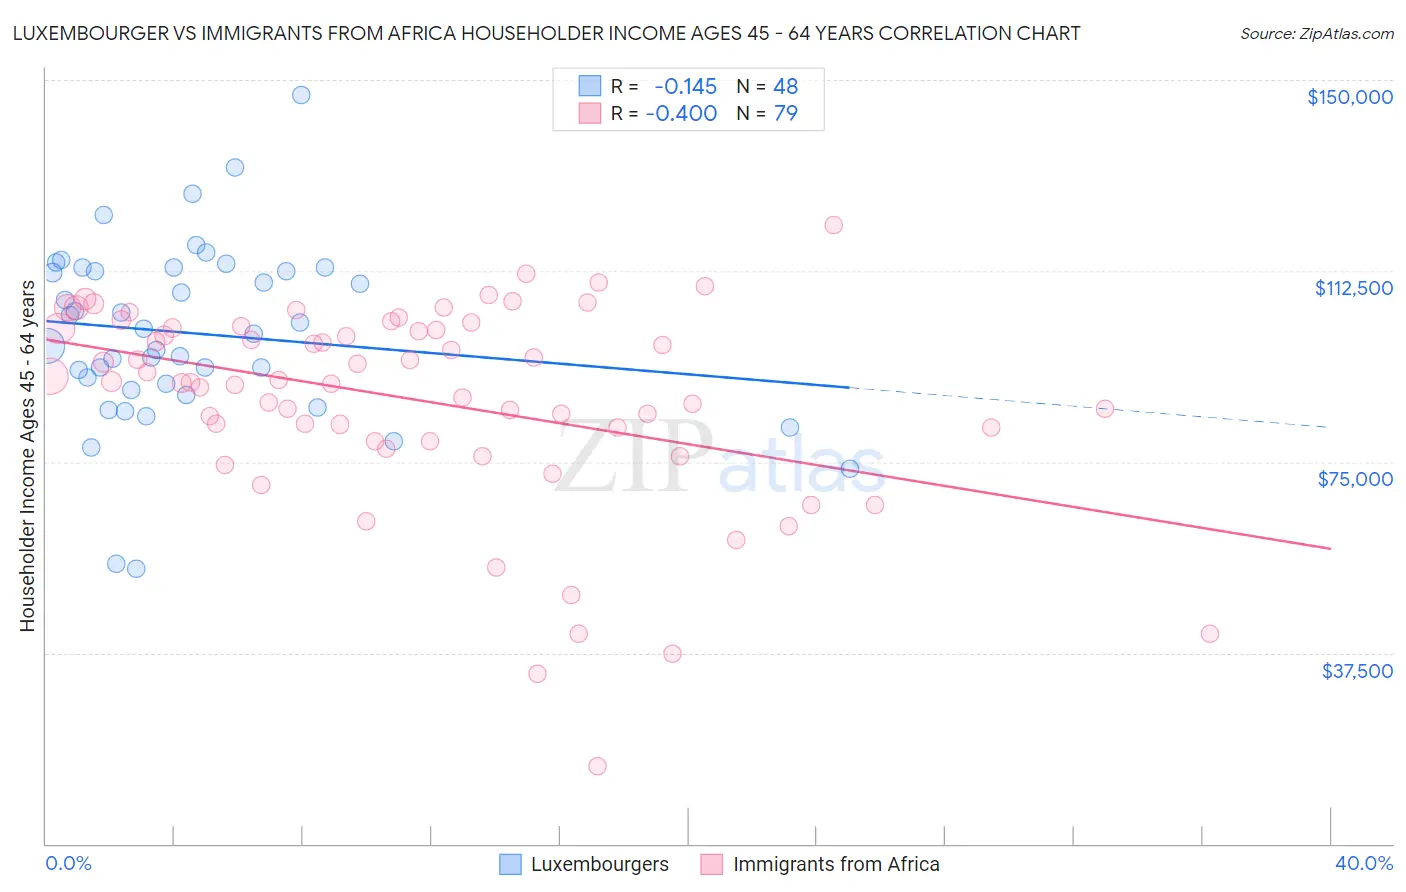 Luxembourger vs Immigrants from Africa Householder Income Ages 45 - 64 years